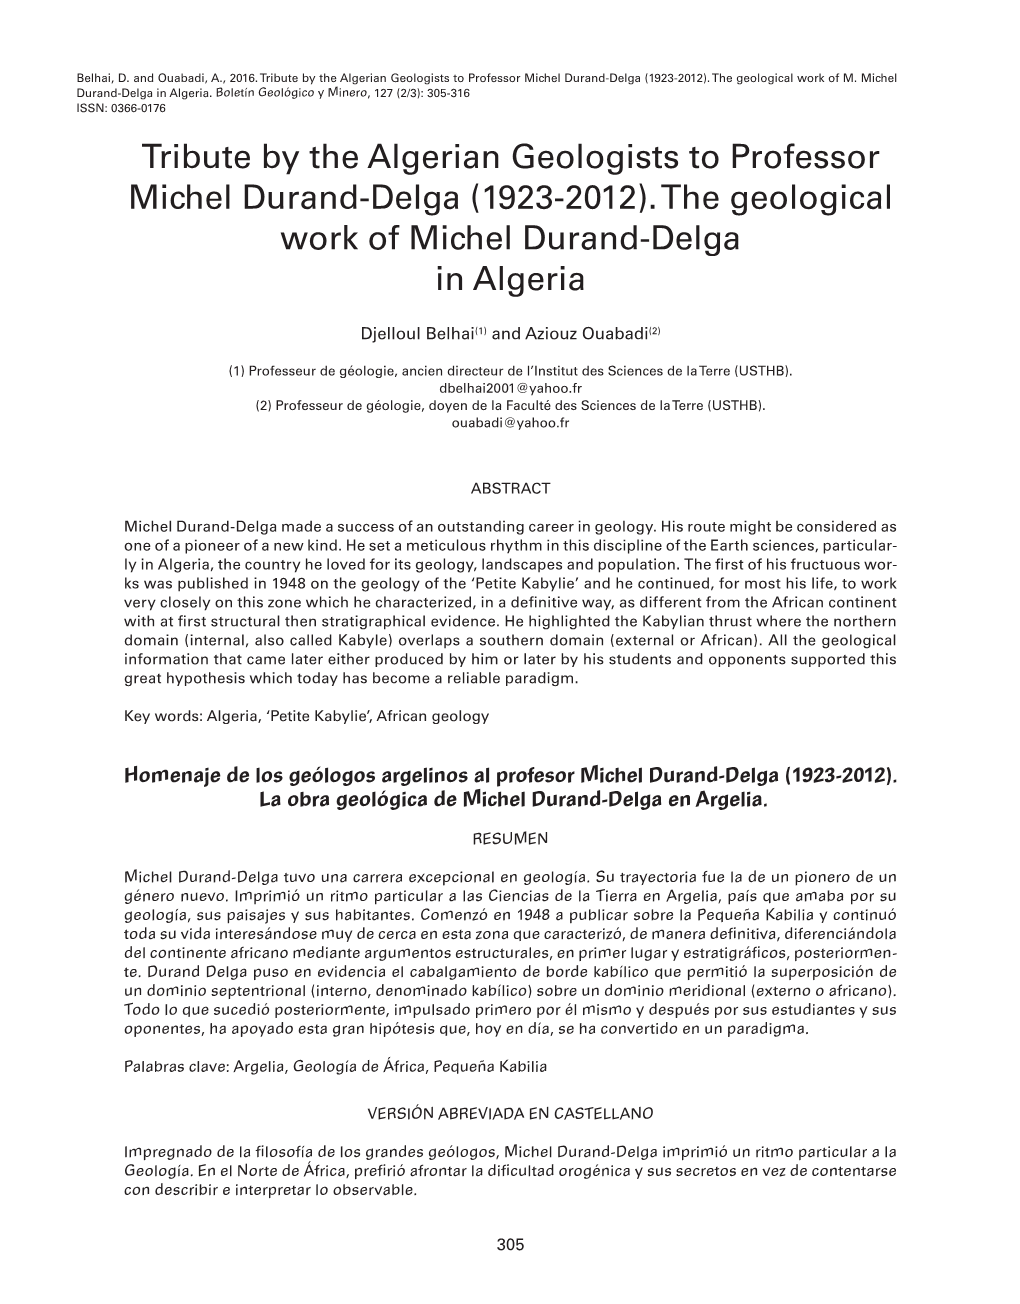 Tribute by the Algerian Geologists to Professor Michel Durand-Delga (1923-2012)